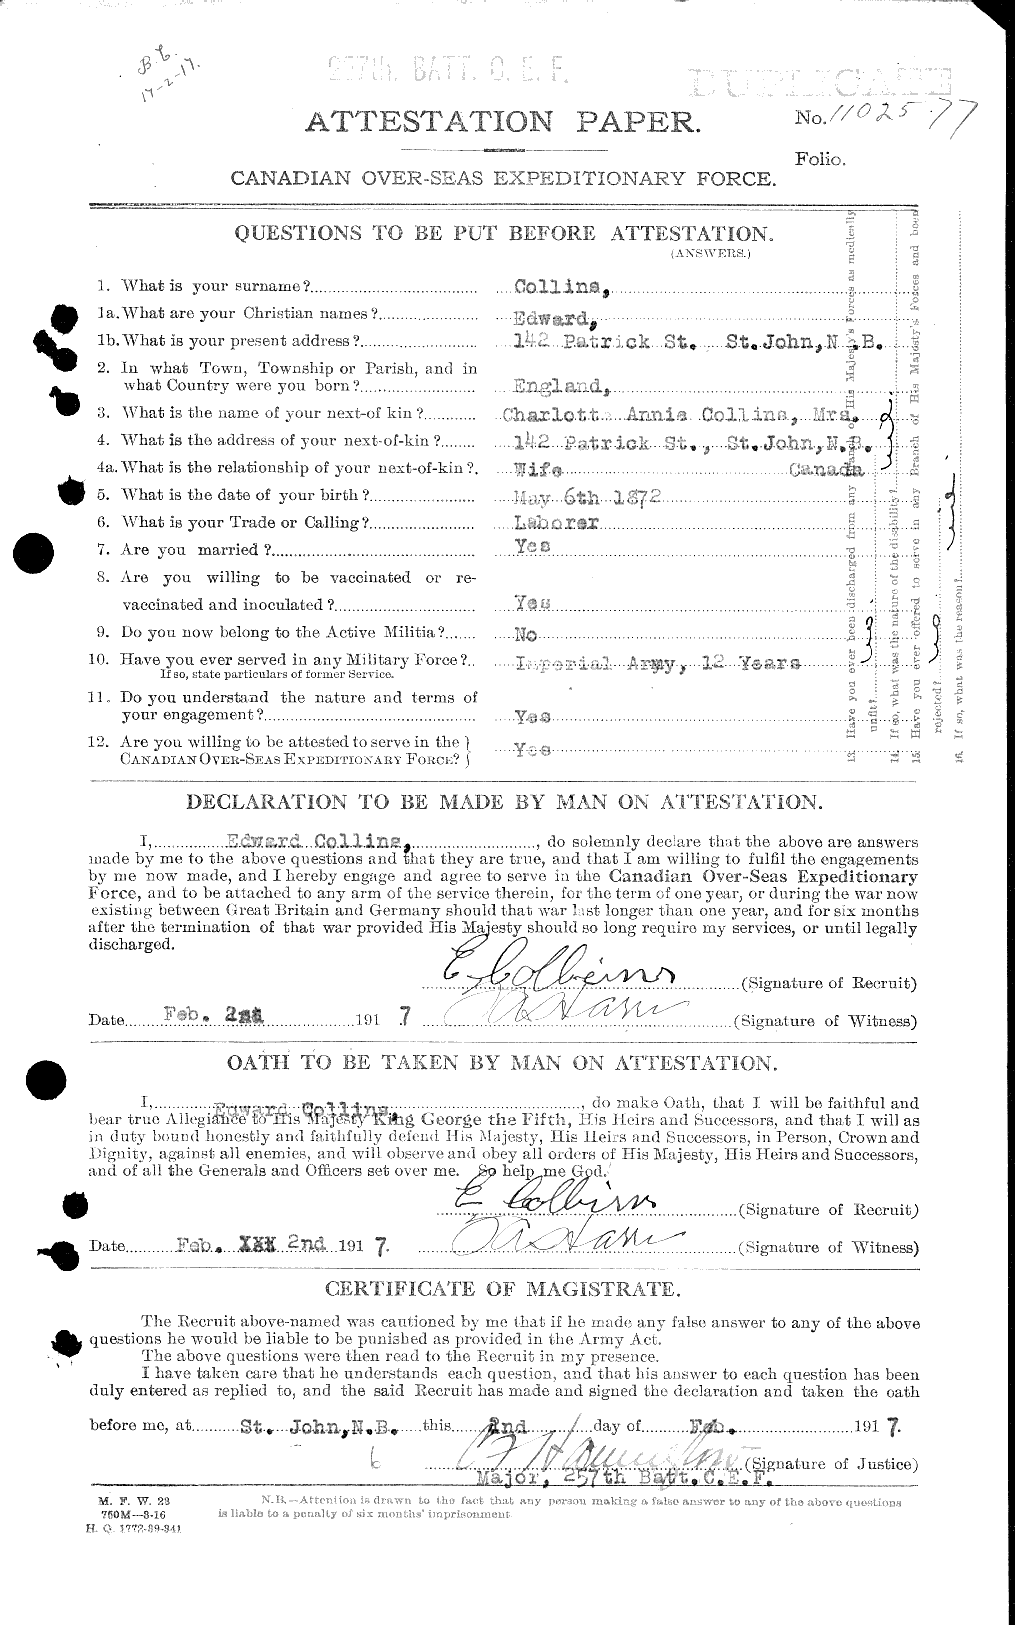 Personnel Records of the First World War - CEF 037741a